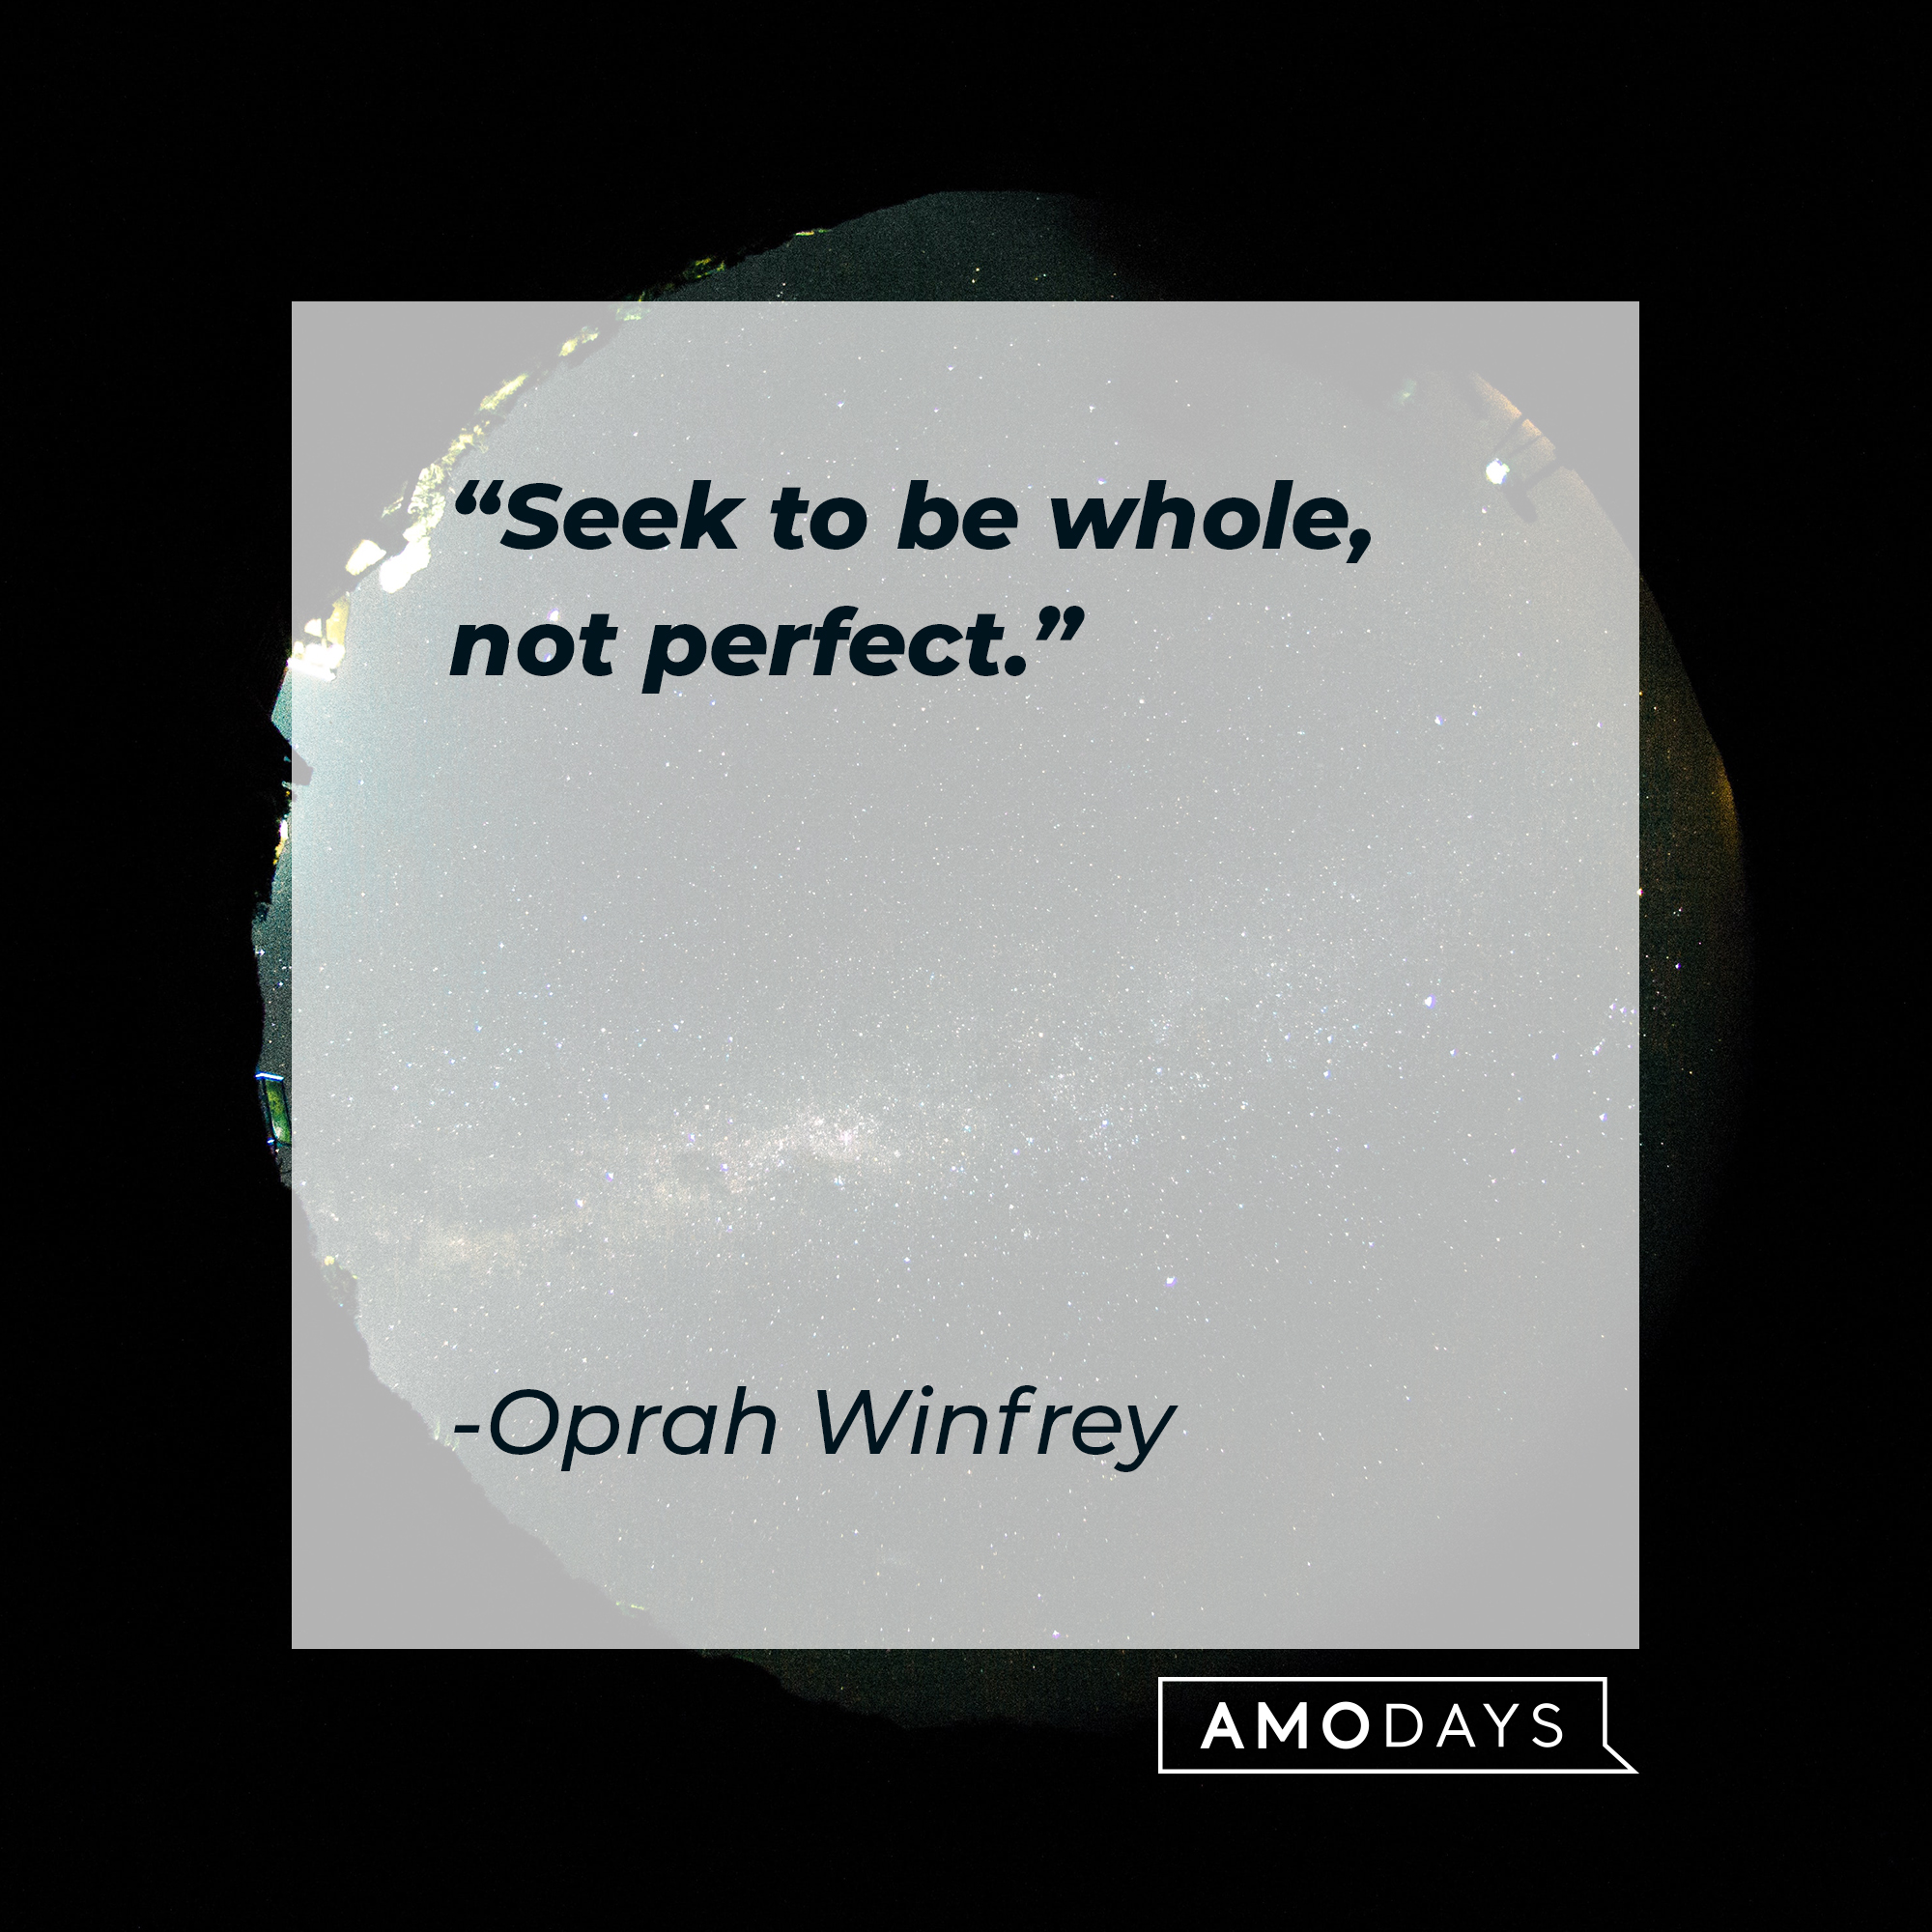 Oprah Winfrey's quote: "Seek to be whole, not perfect." | Image: Unsplash